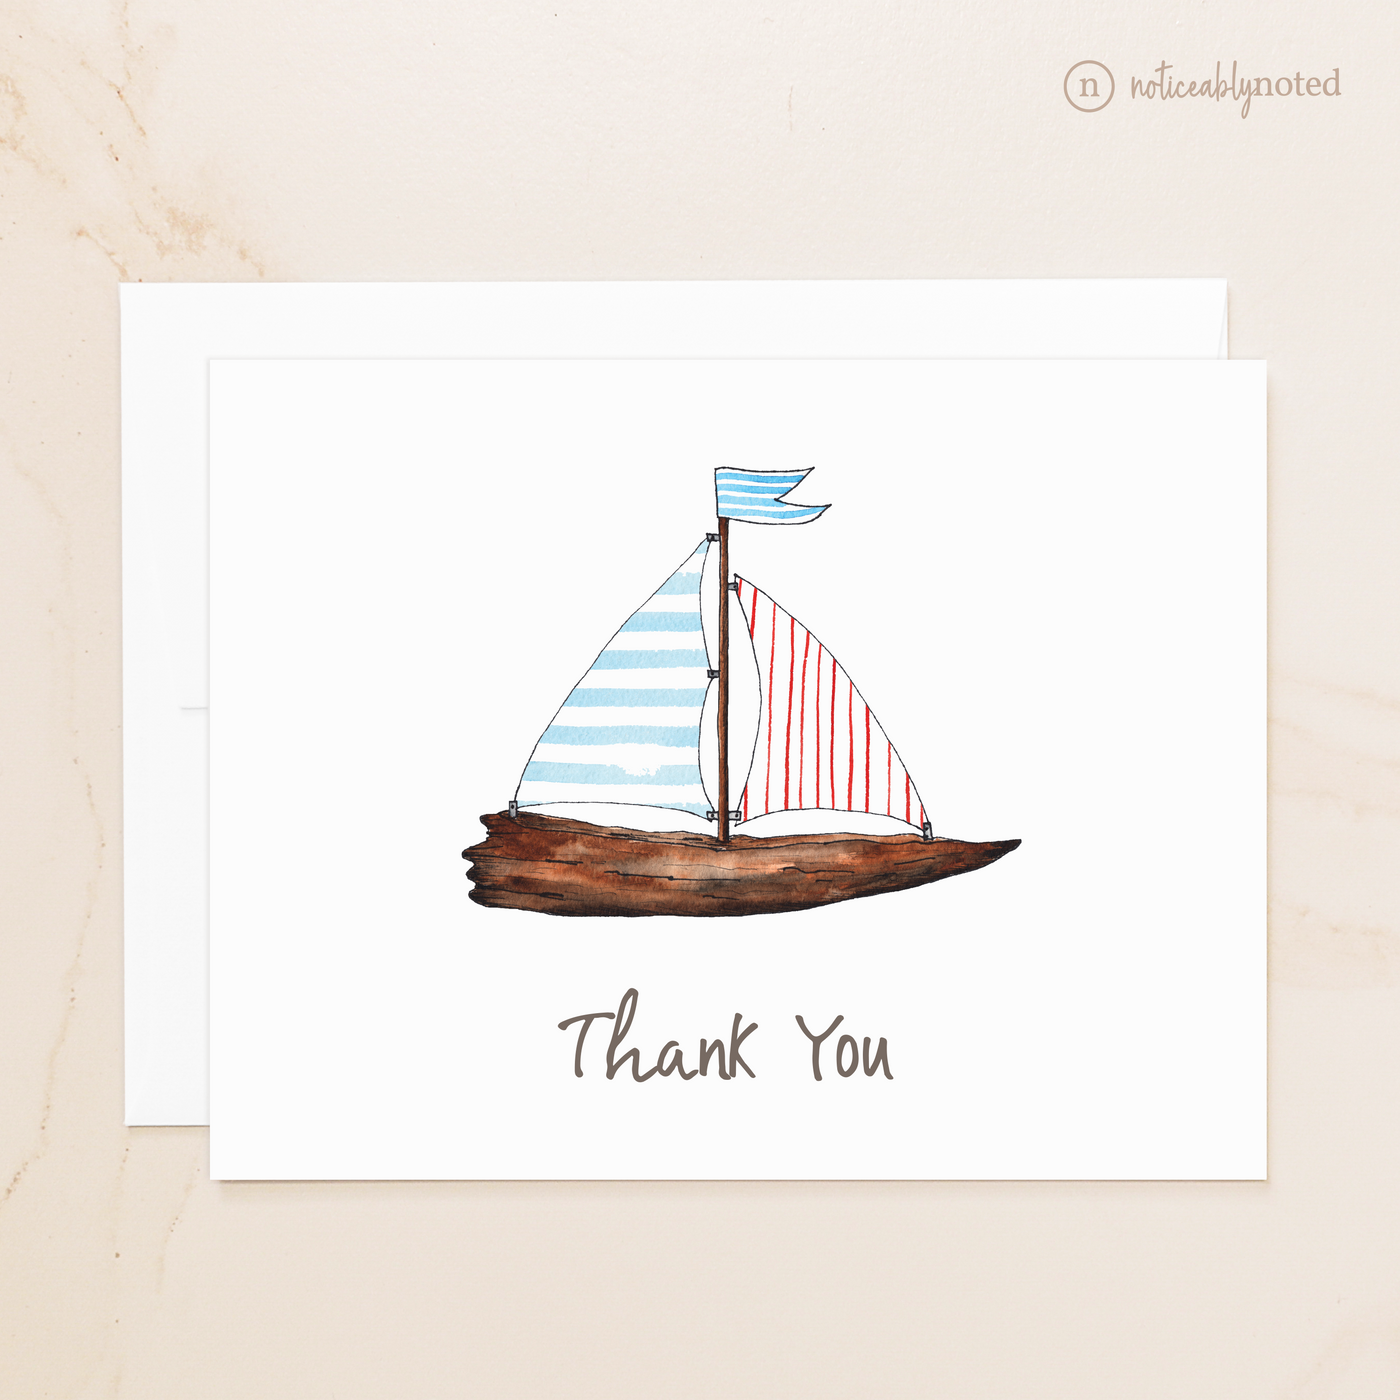 Sailboat Thank You Note Cards | Noticeably Noted